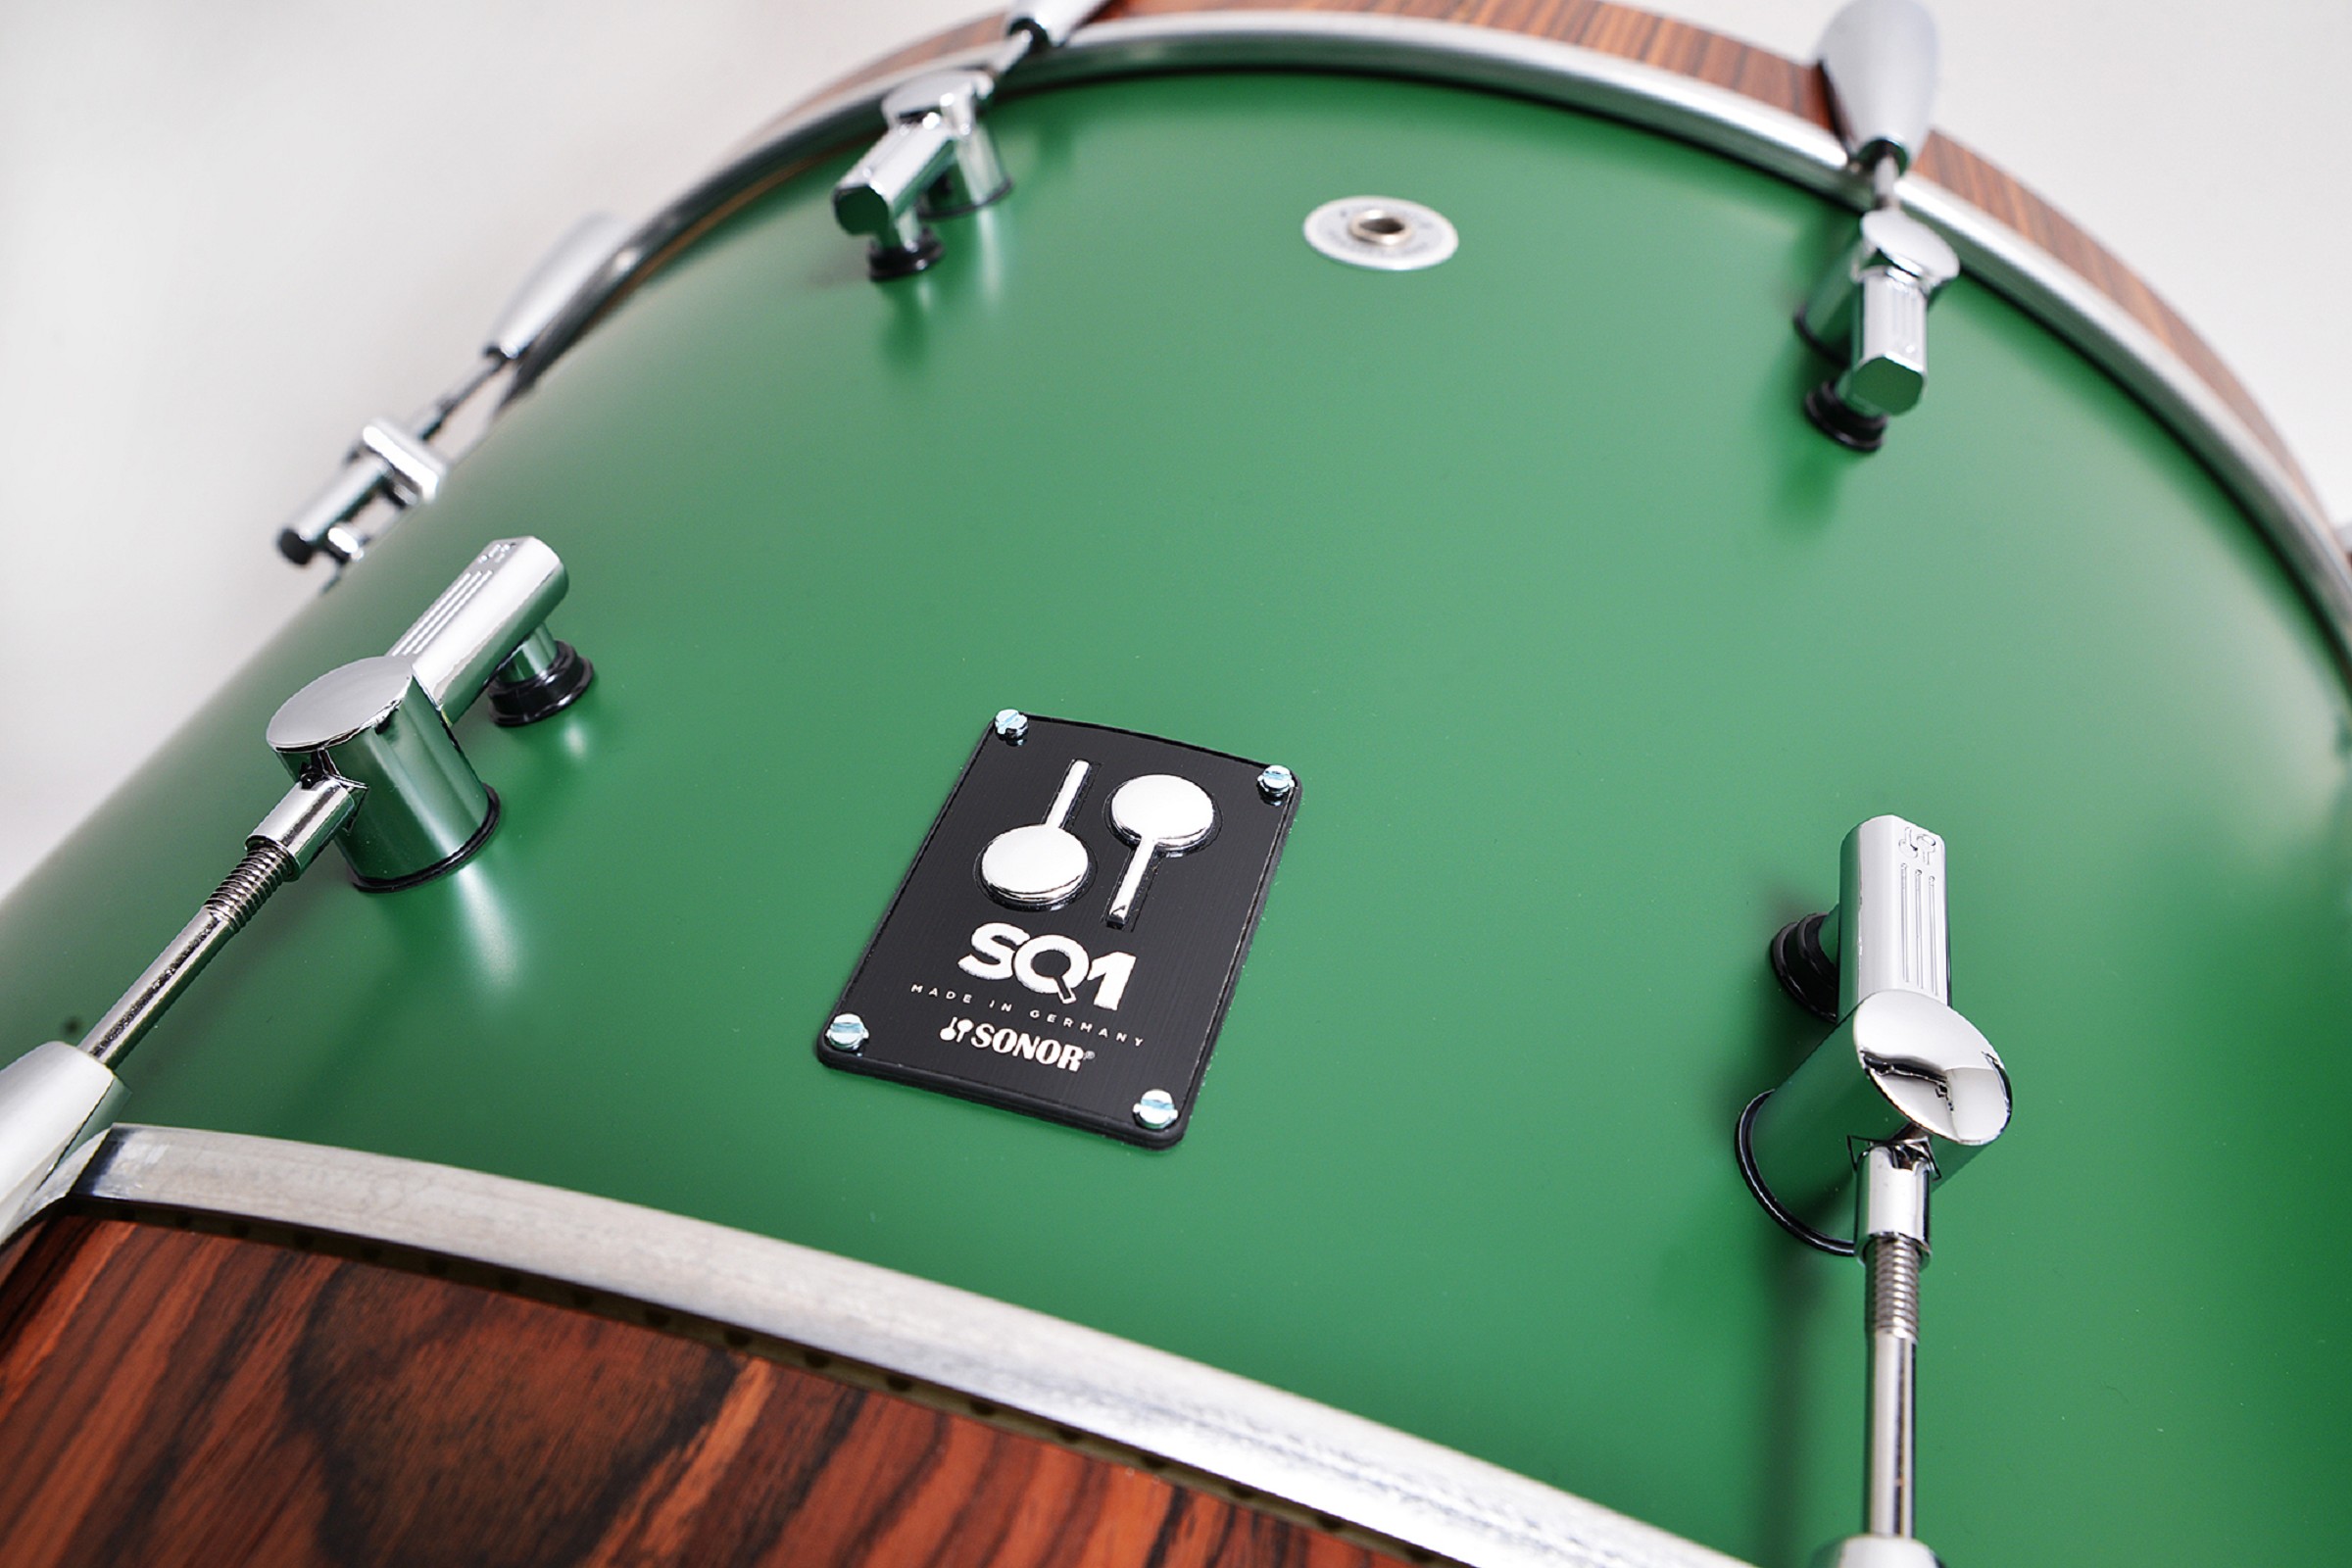 Sonor SQ1 Shell Set Roadster Green 20BD/12T/14FT